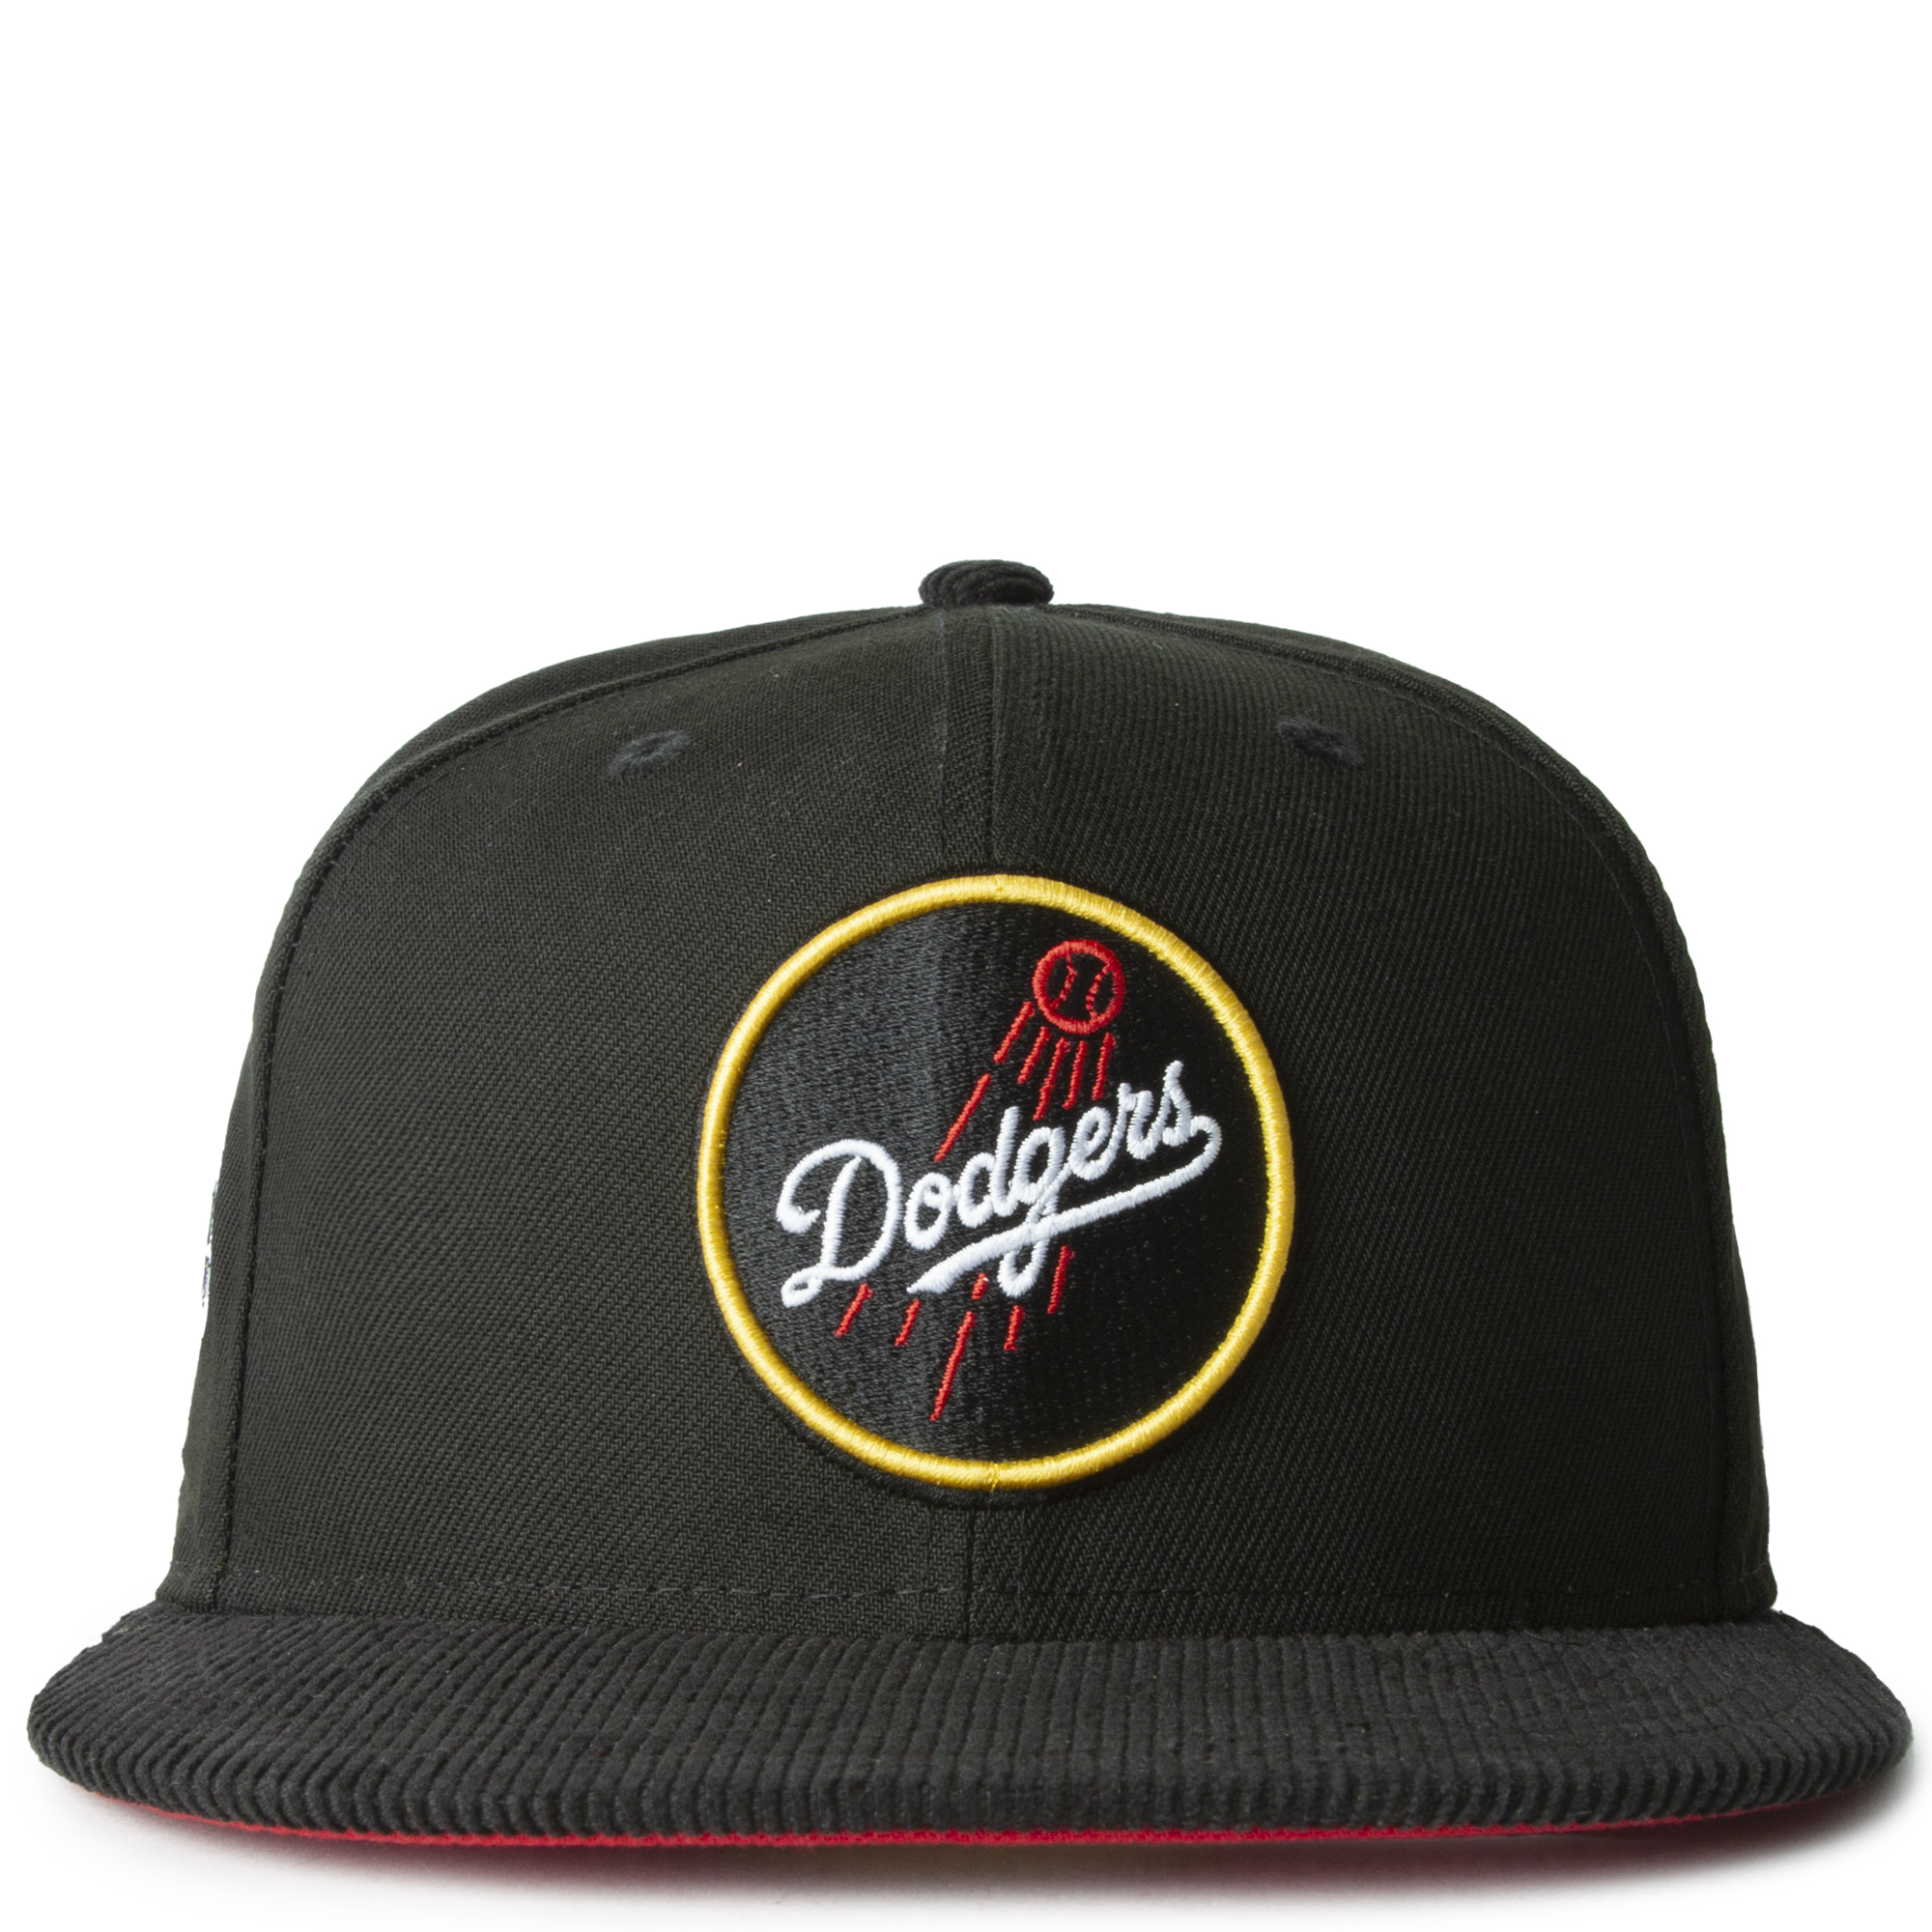 Los Angeles Dodgers New Era Fashion Color Basic 59FIFTY Fitted Hat - Red